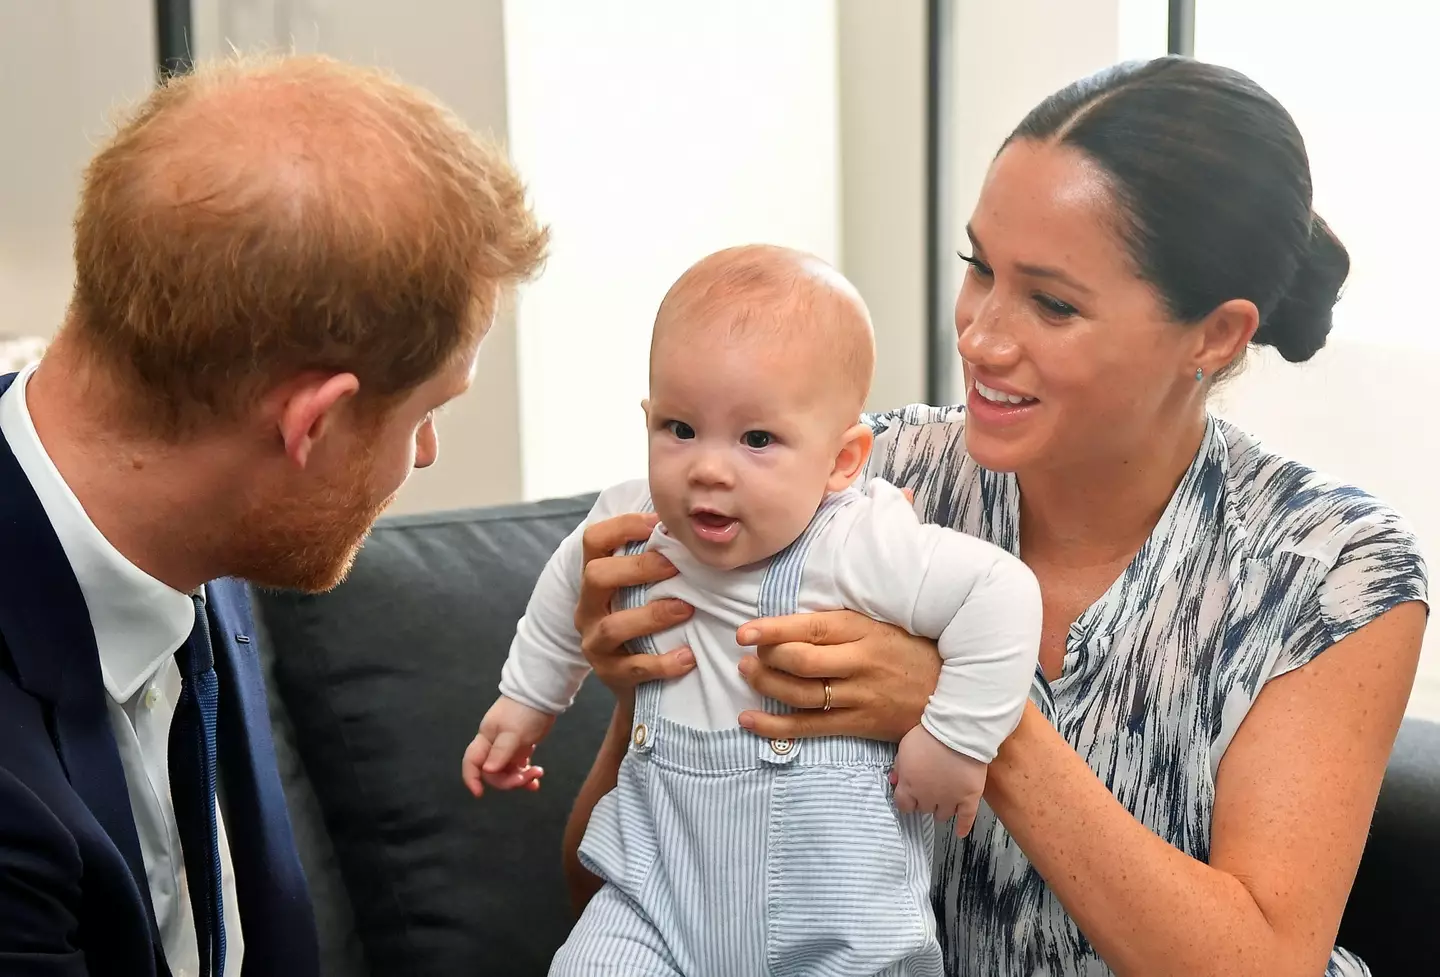 Meghan also revealed that Archie had been involved in a fire when he was a baby.